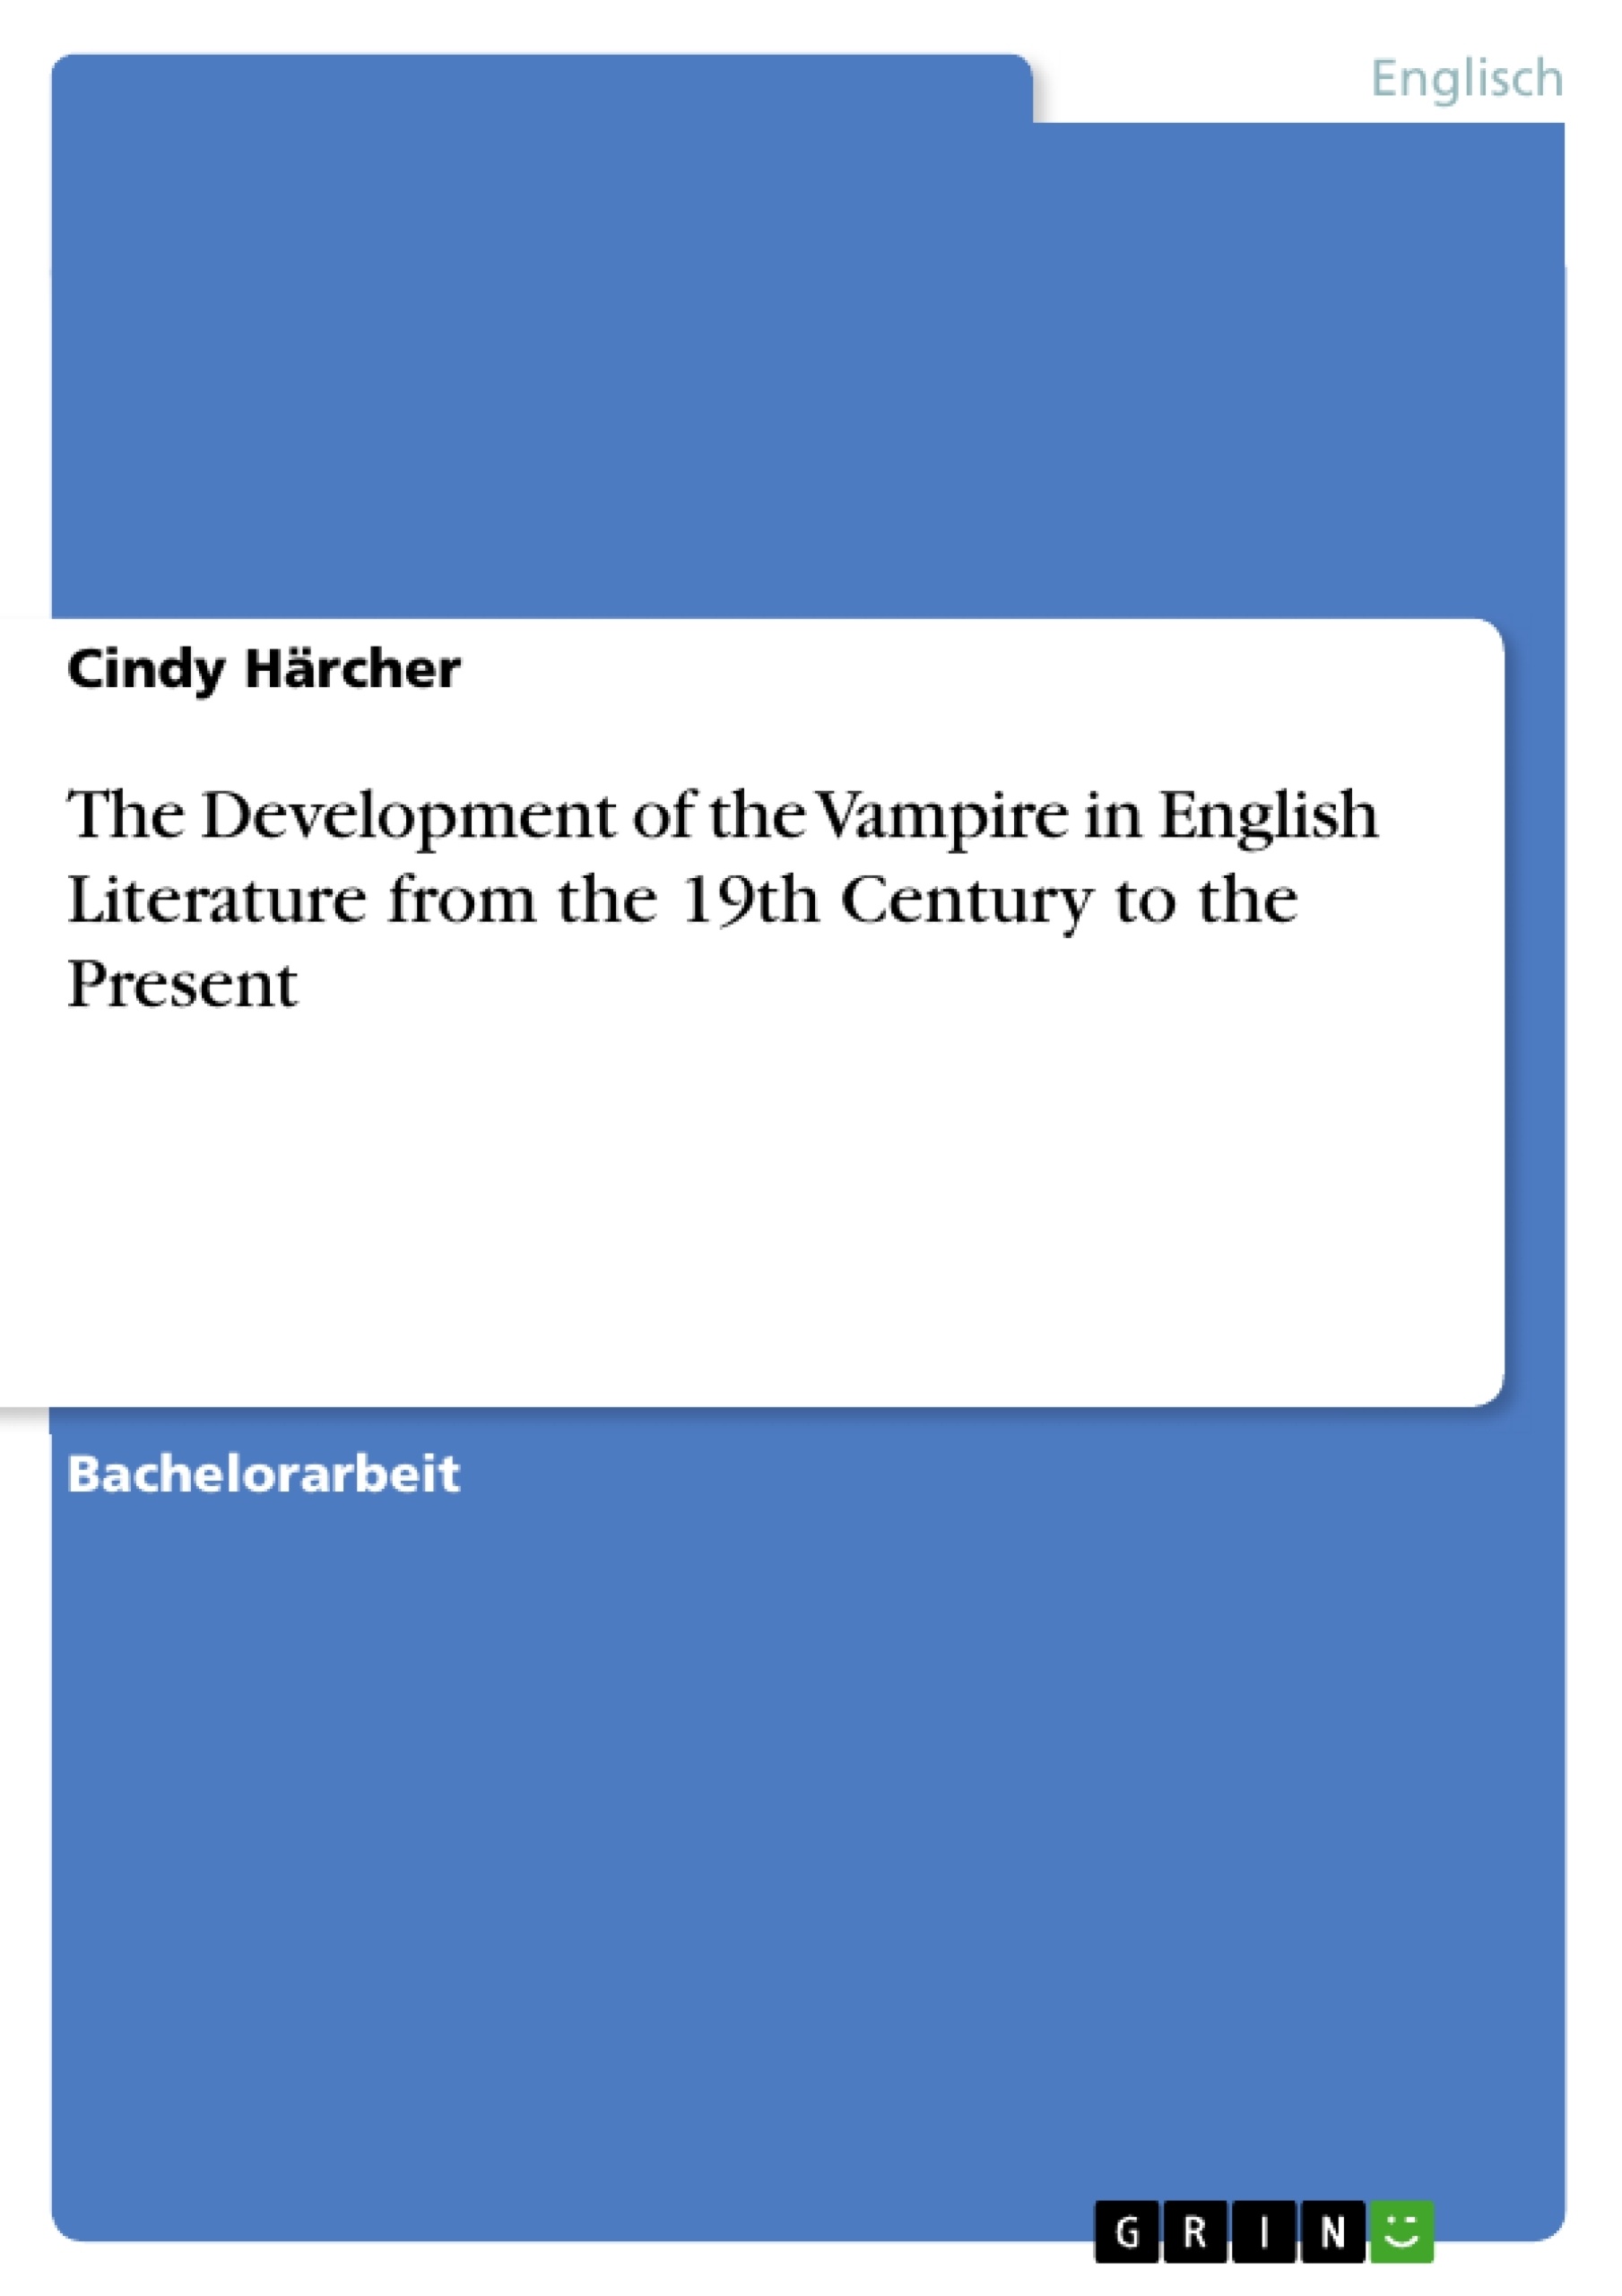 Titre: The Development of the Vampire in English Literature from the 19th Century to the Present